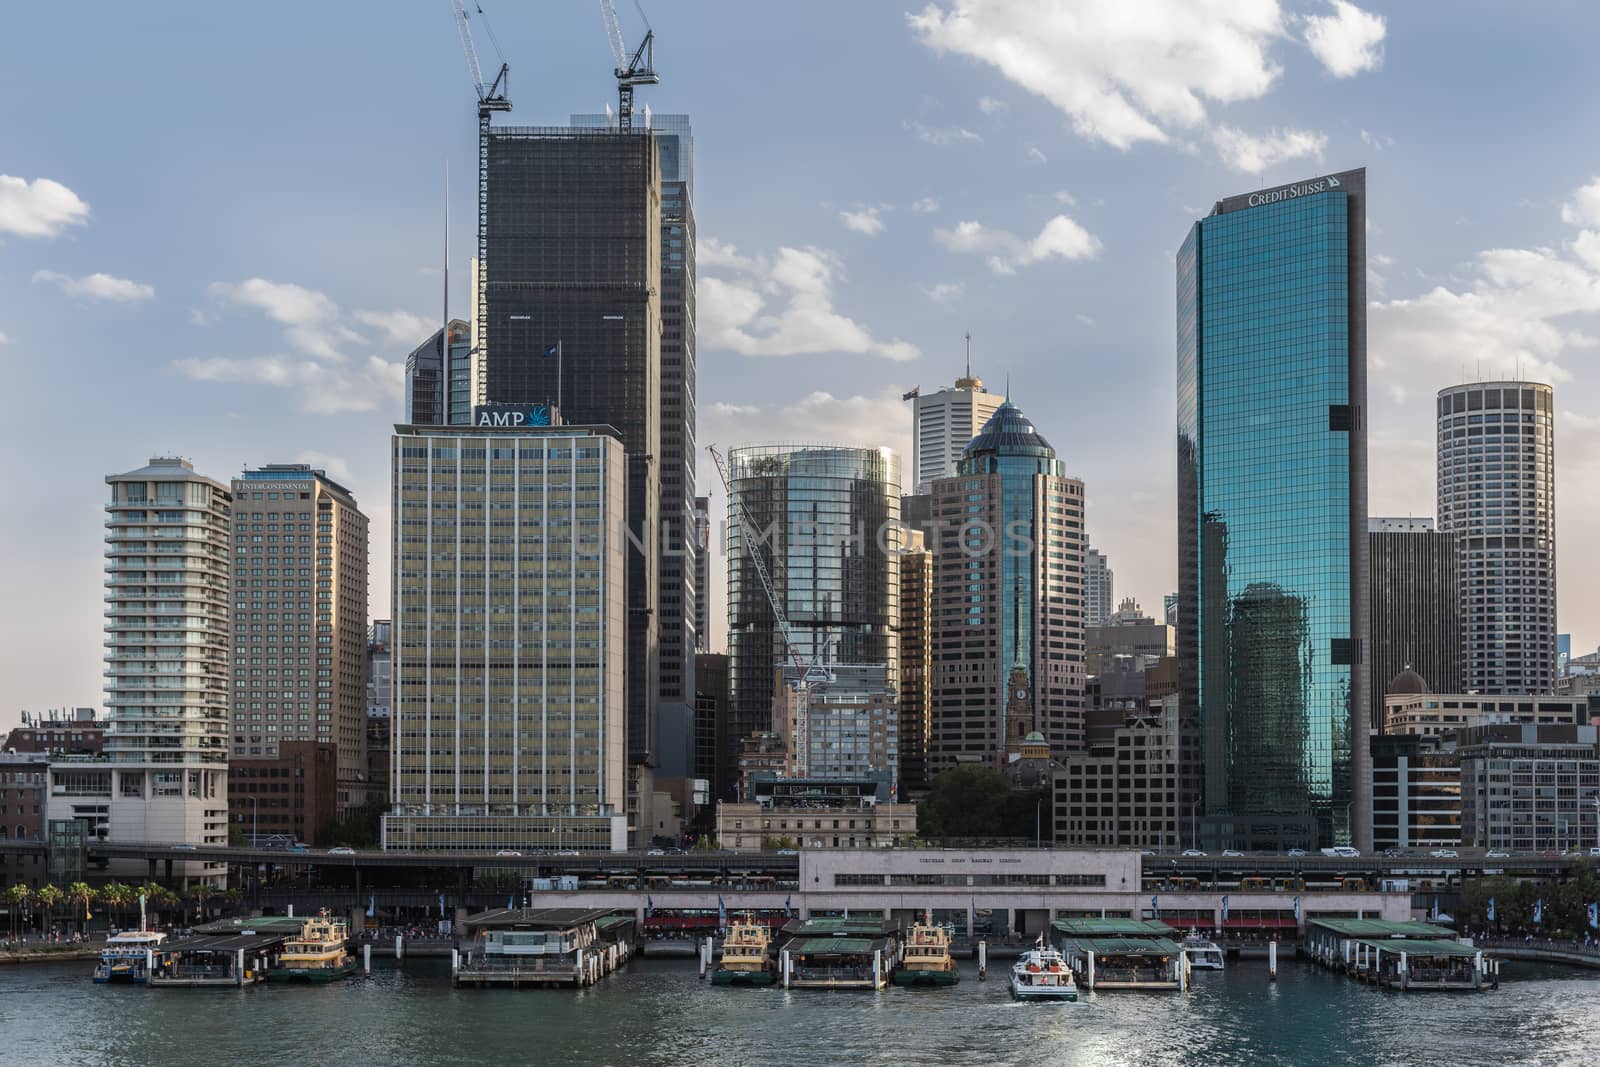 Sydney, Australia - February 12, 2019: Ferry terminal and Circular Quay Railway Station plus skyline in back. Highrises under construction with cranes. Evening shot with light blue sky.